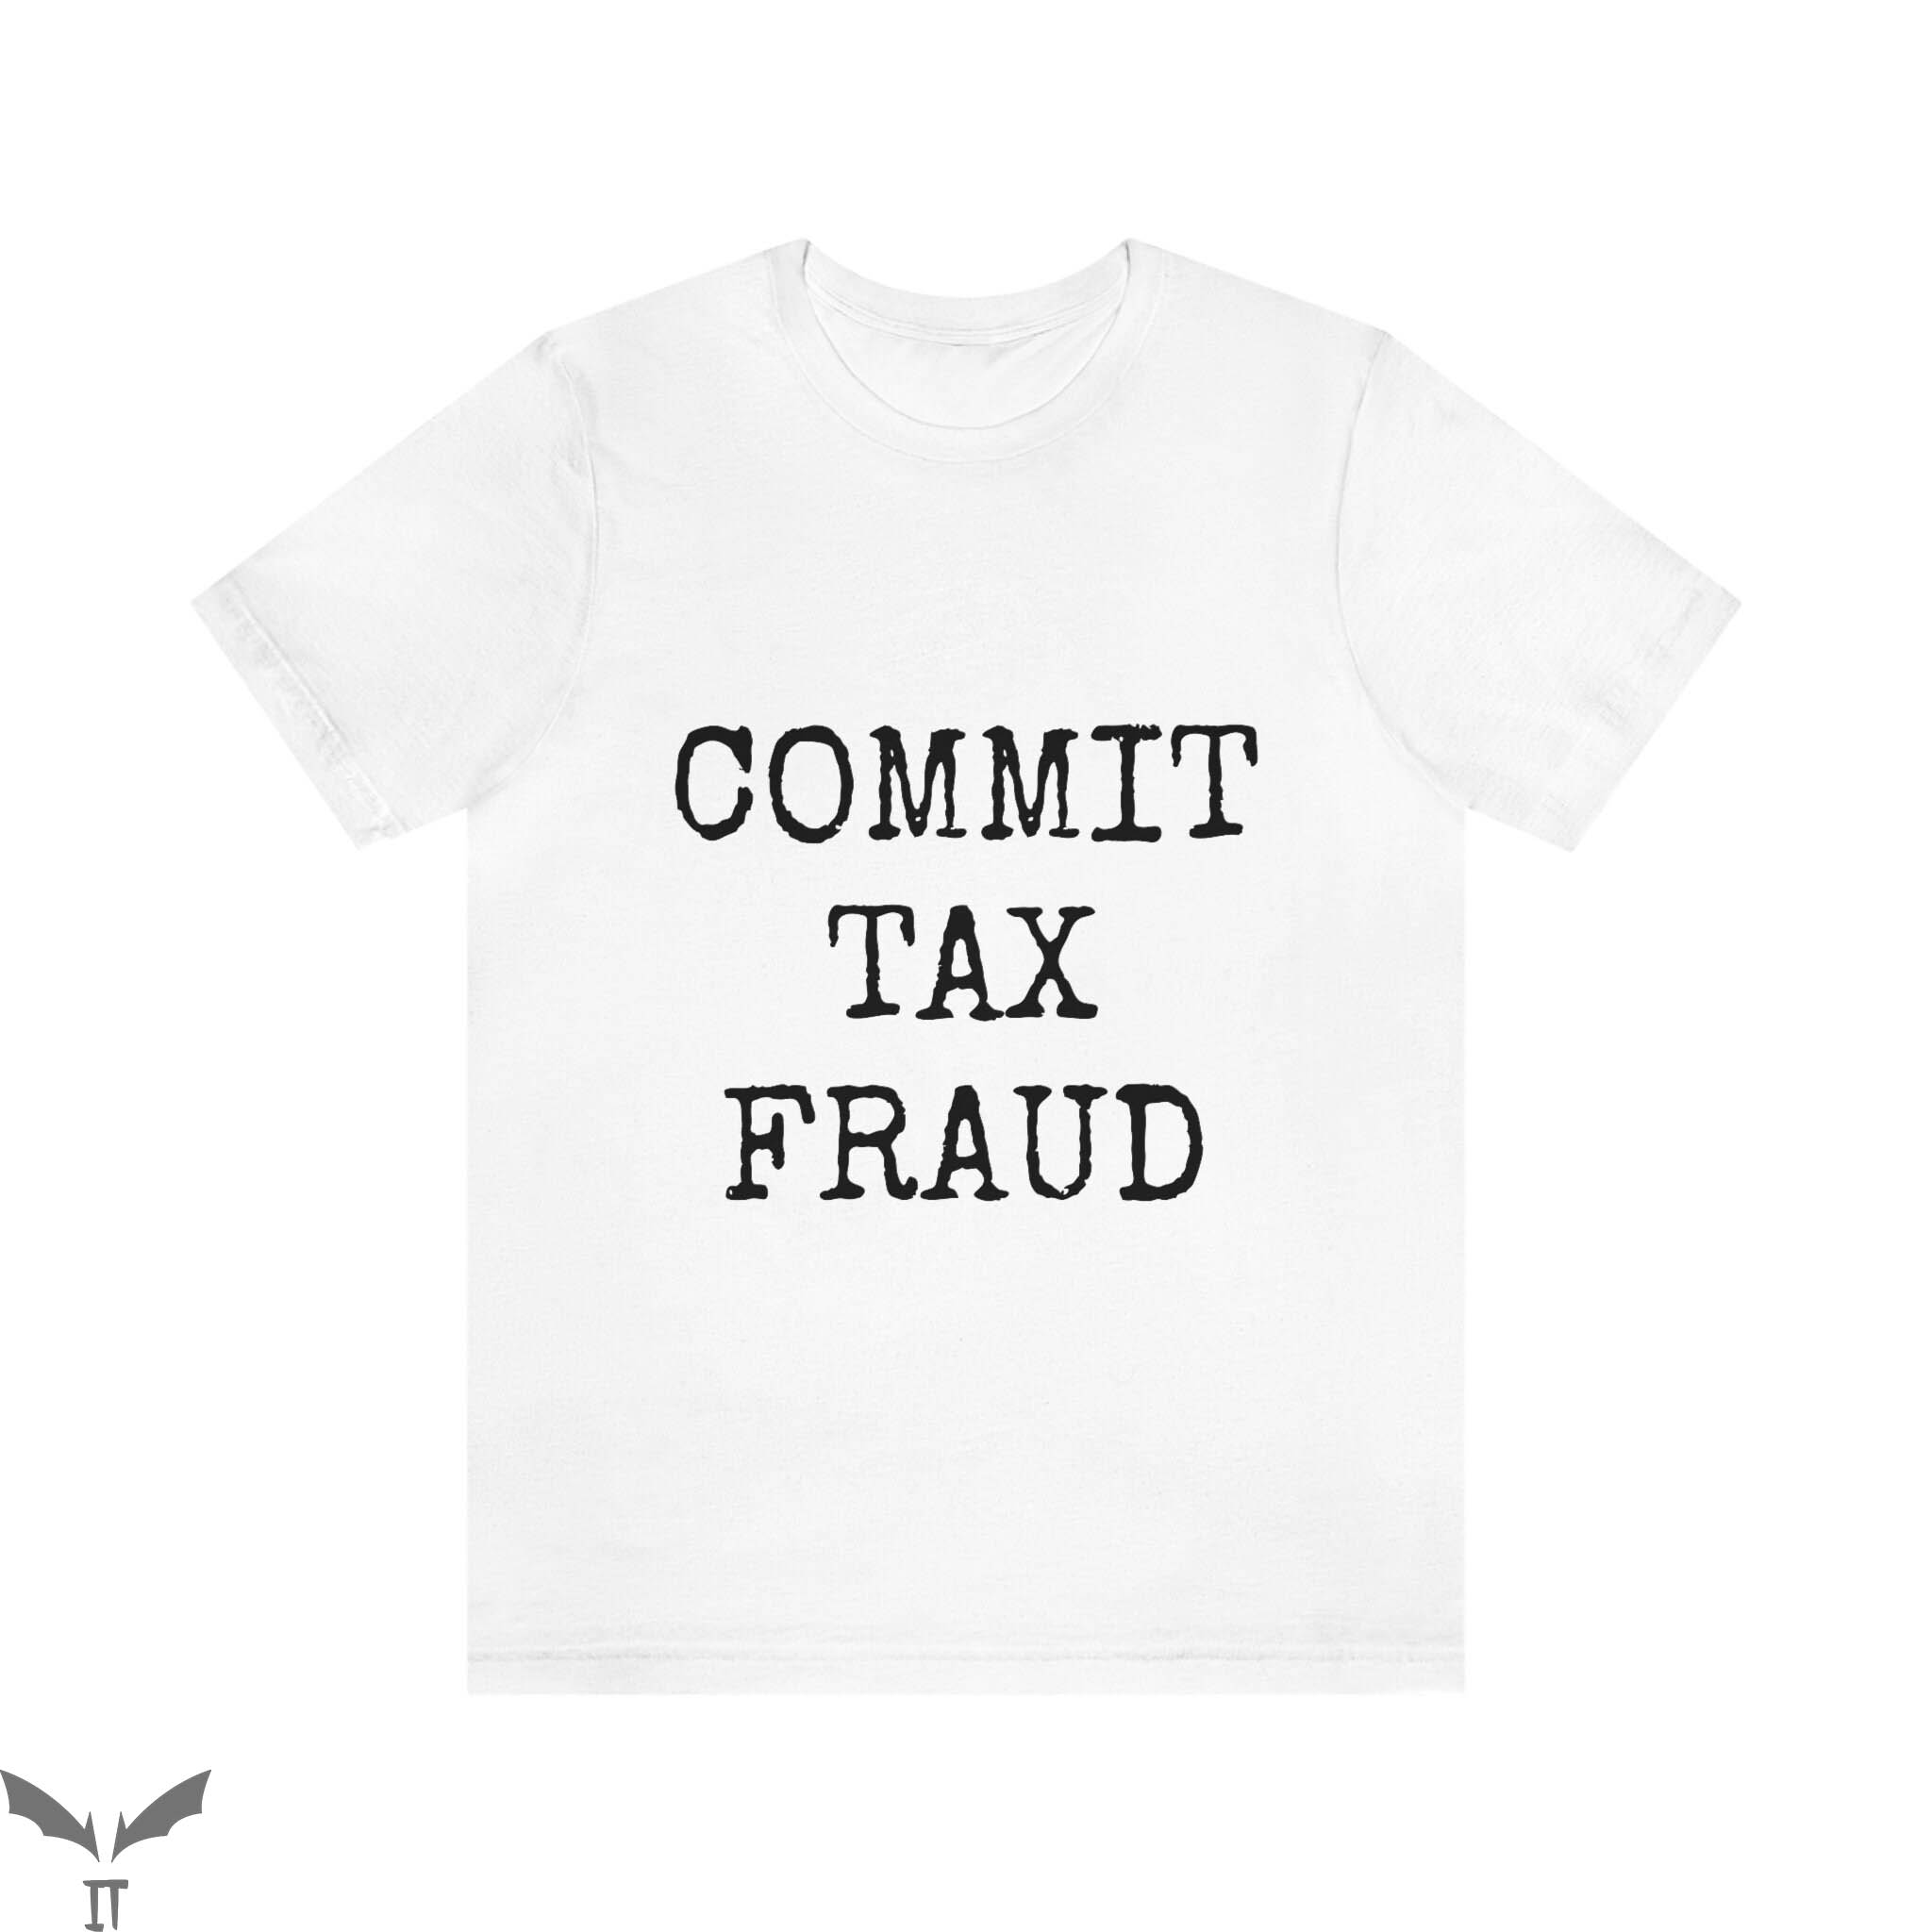 Commit Tax Fraud T-Shirt Cool Graphic Trendy Design Tee